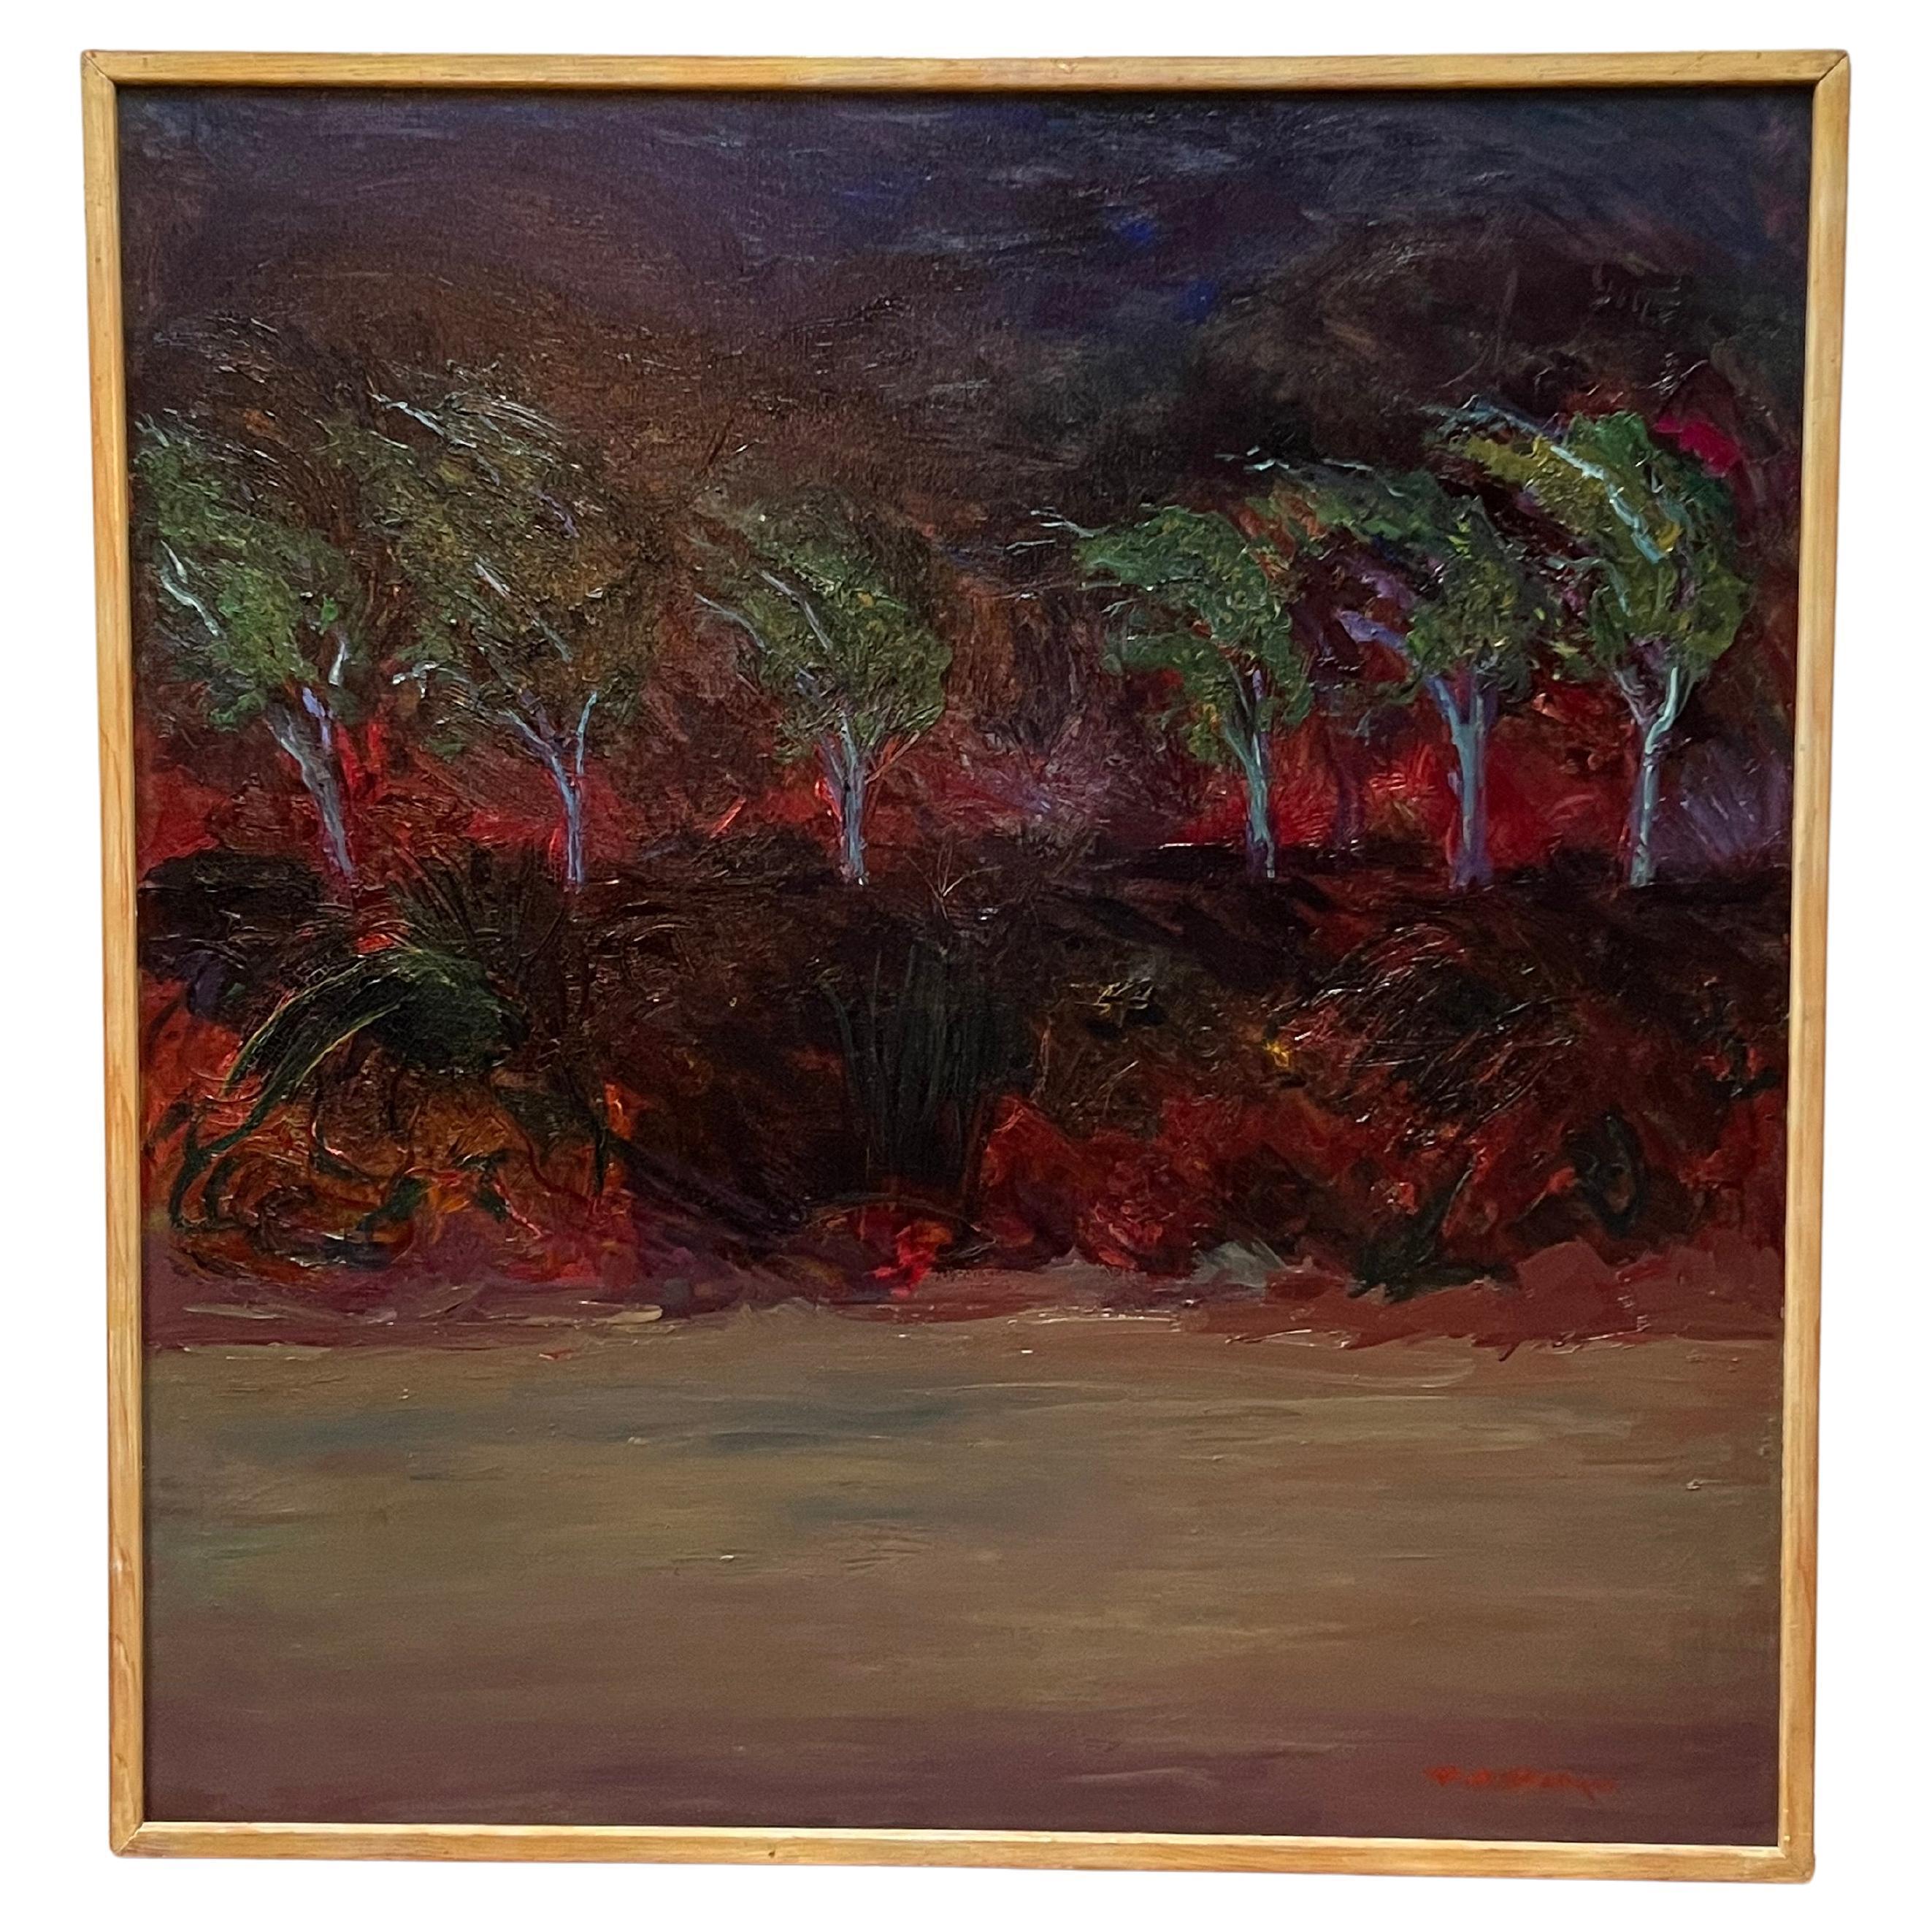 This abstract landscape painting by Pat Berger is an intense artwork, with its dramatically textured brushstrokes and a powerful and dynamic sense of movement. Deep green trees appear to be surrounded by the flames of a raging wildfire, conjuring up